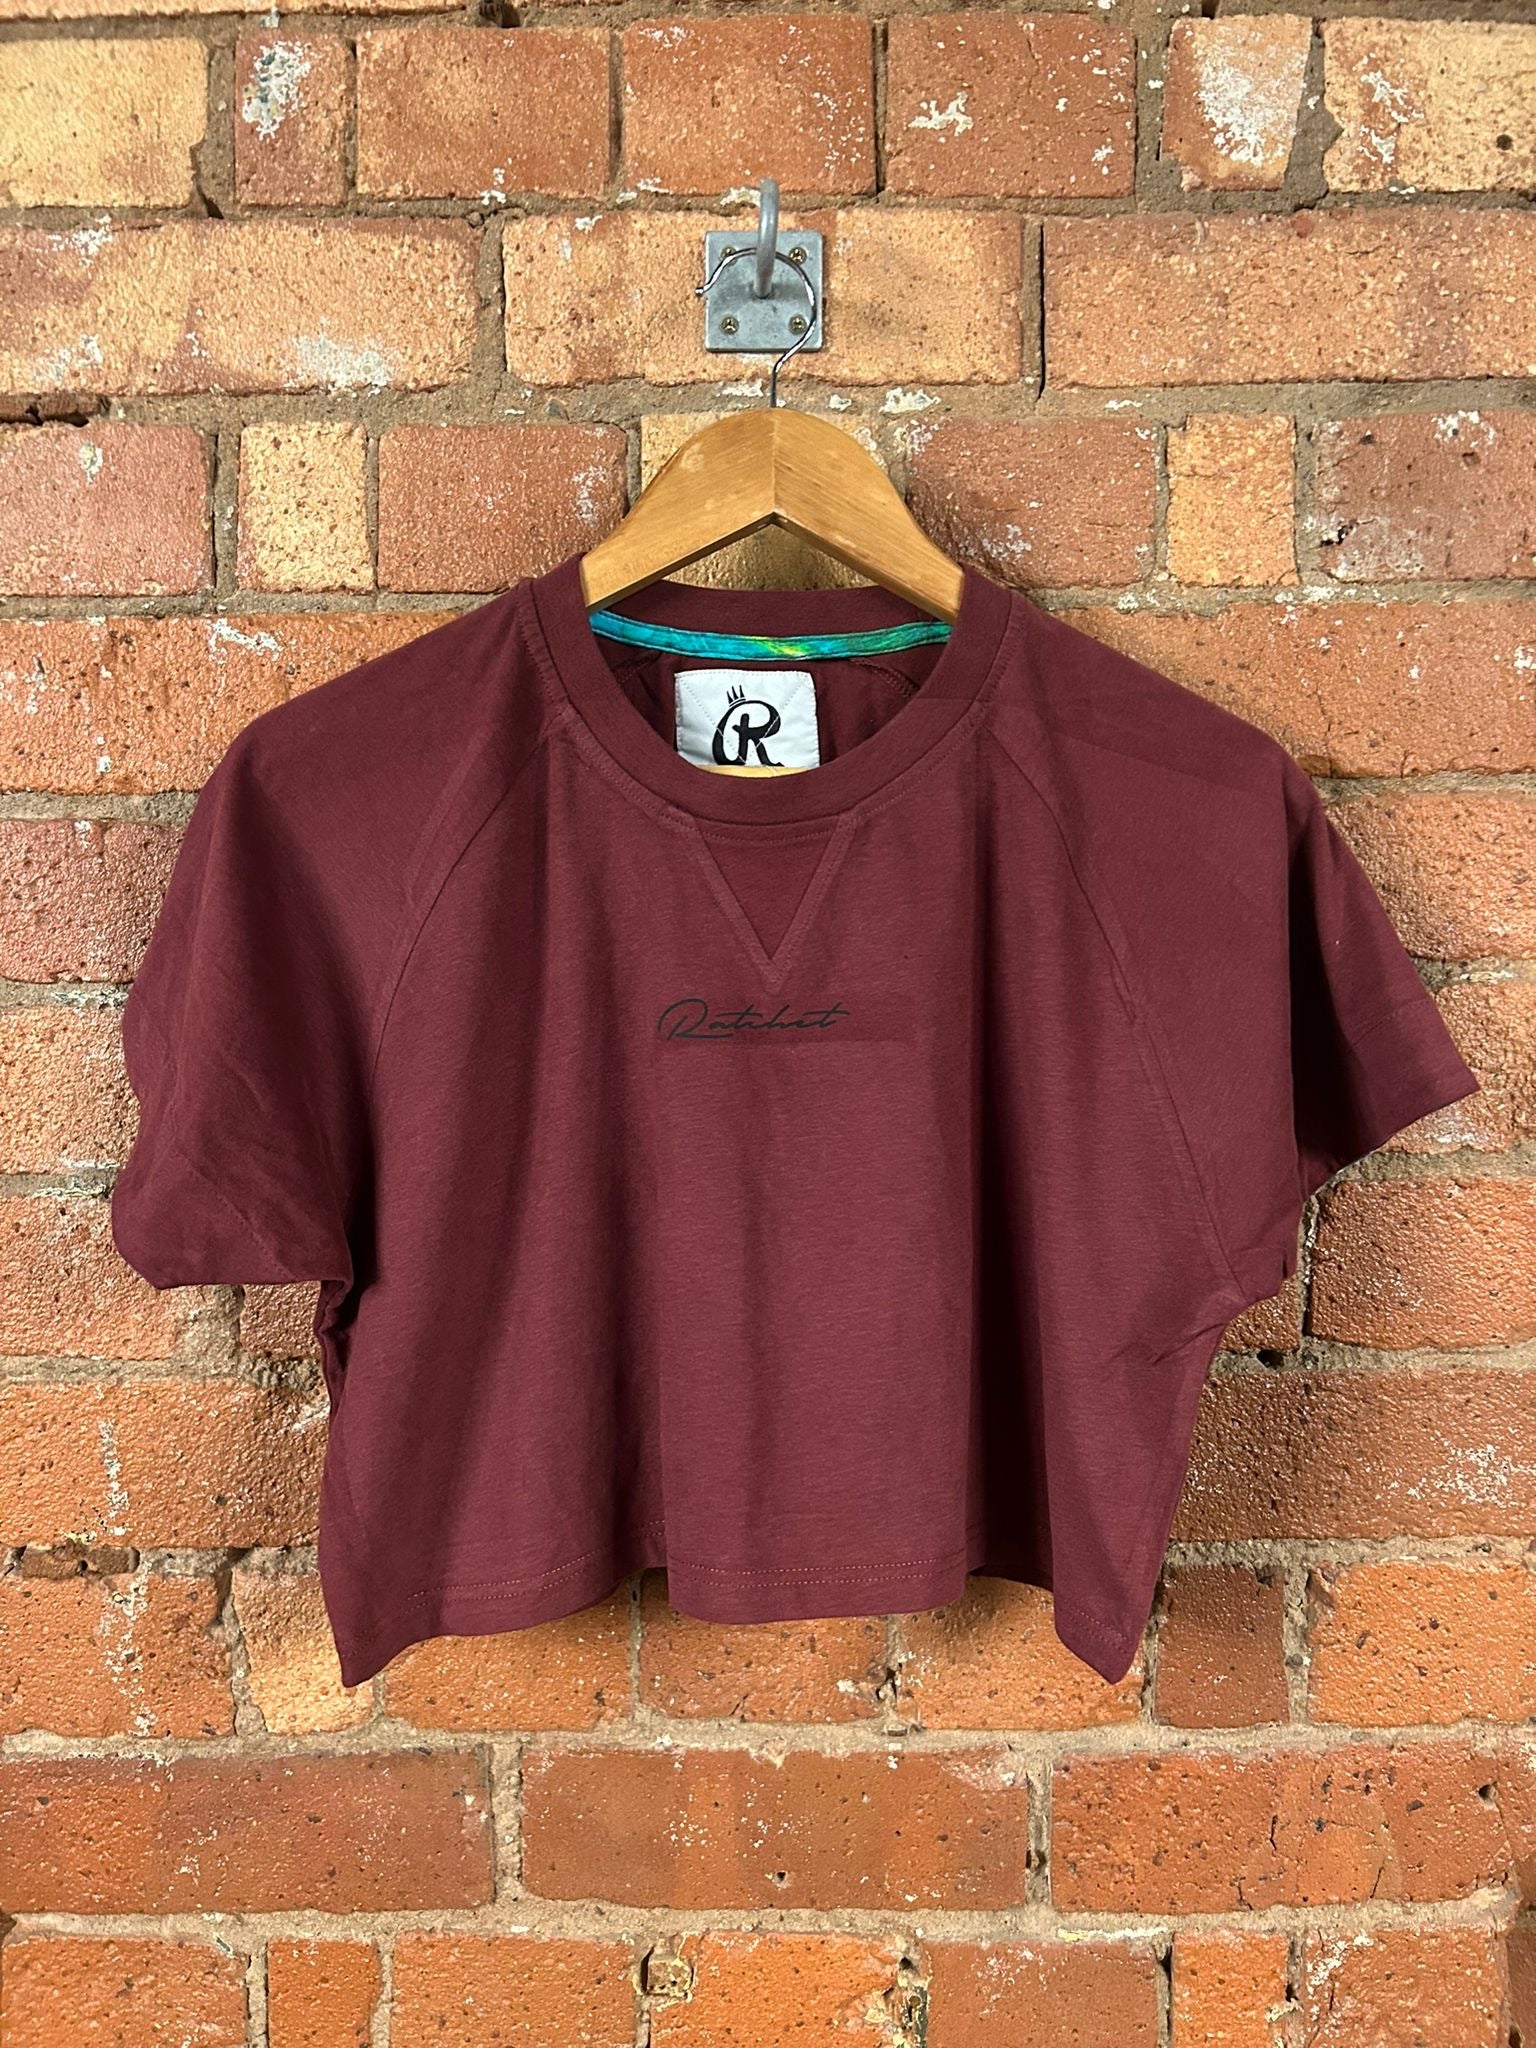 SALE Adult Cropped Tee